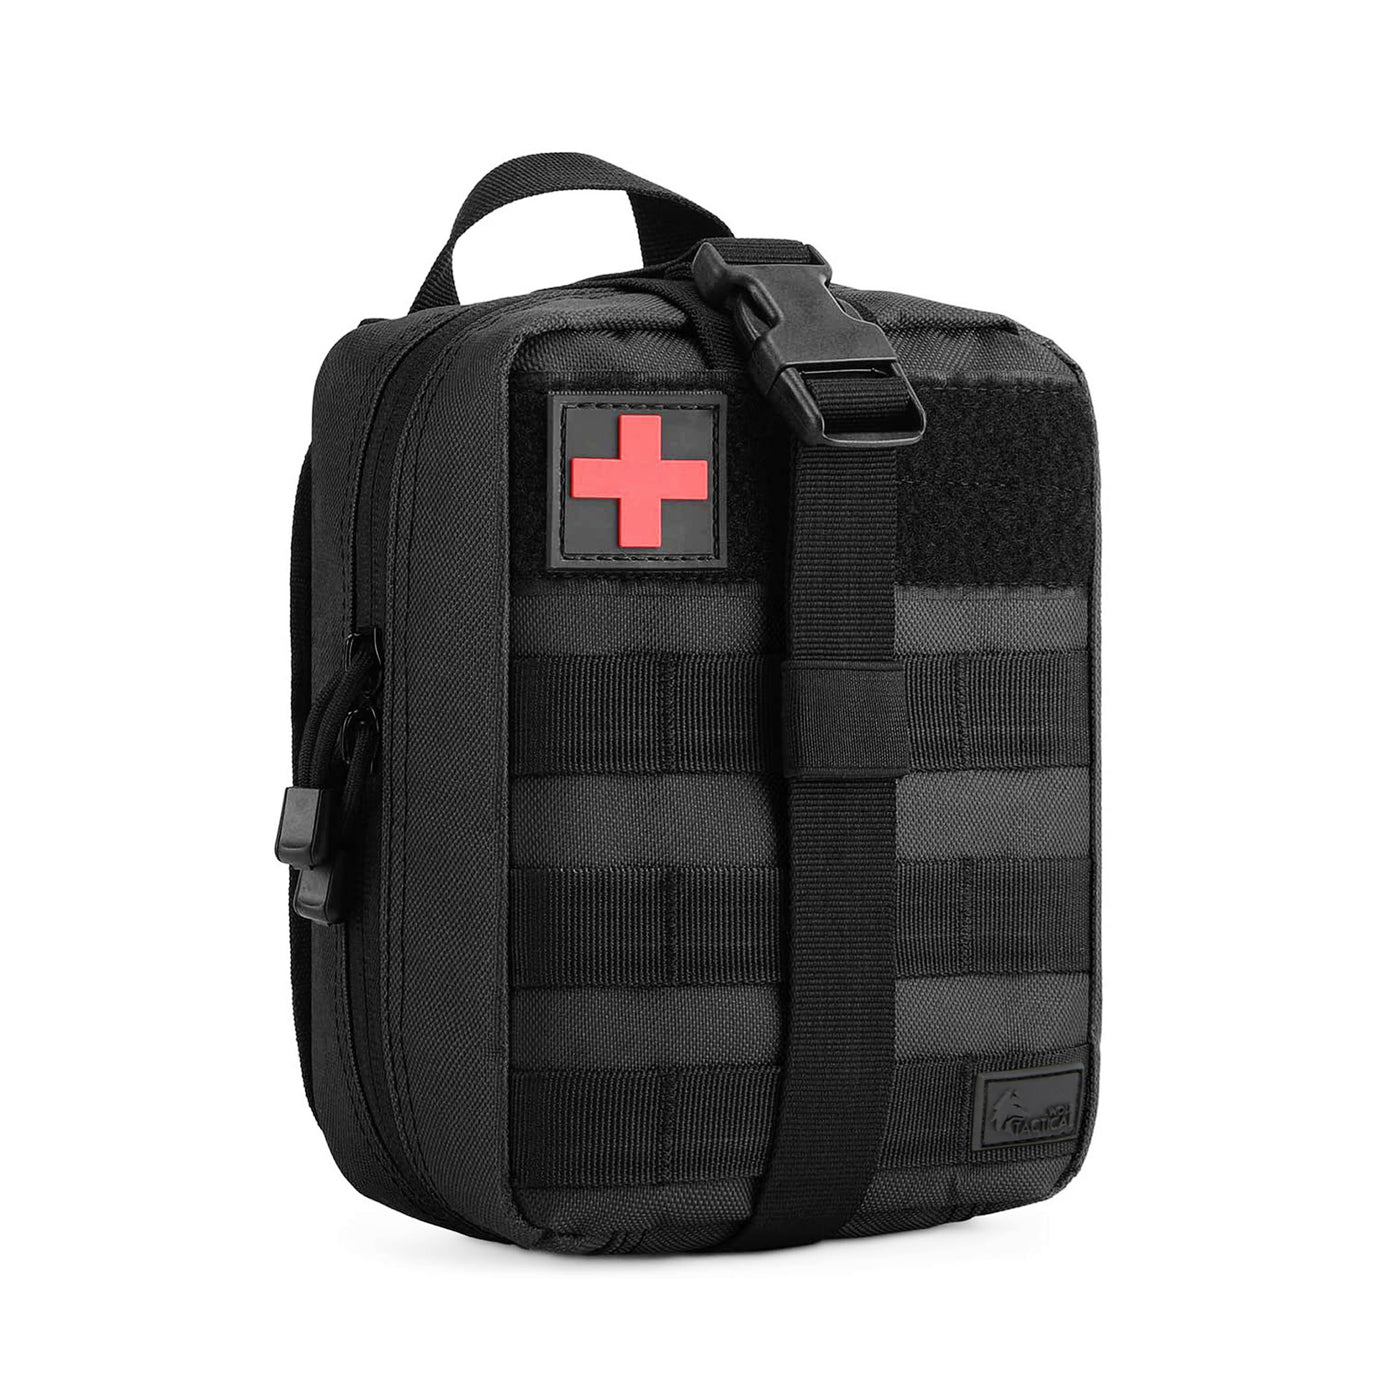 MOLLE First Aid Pouch